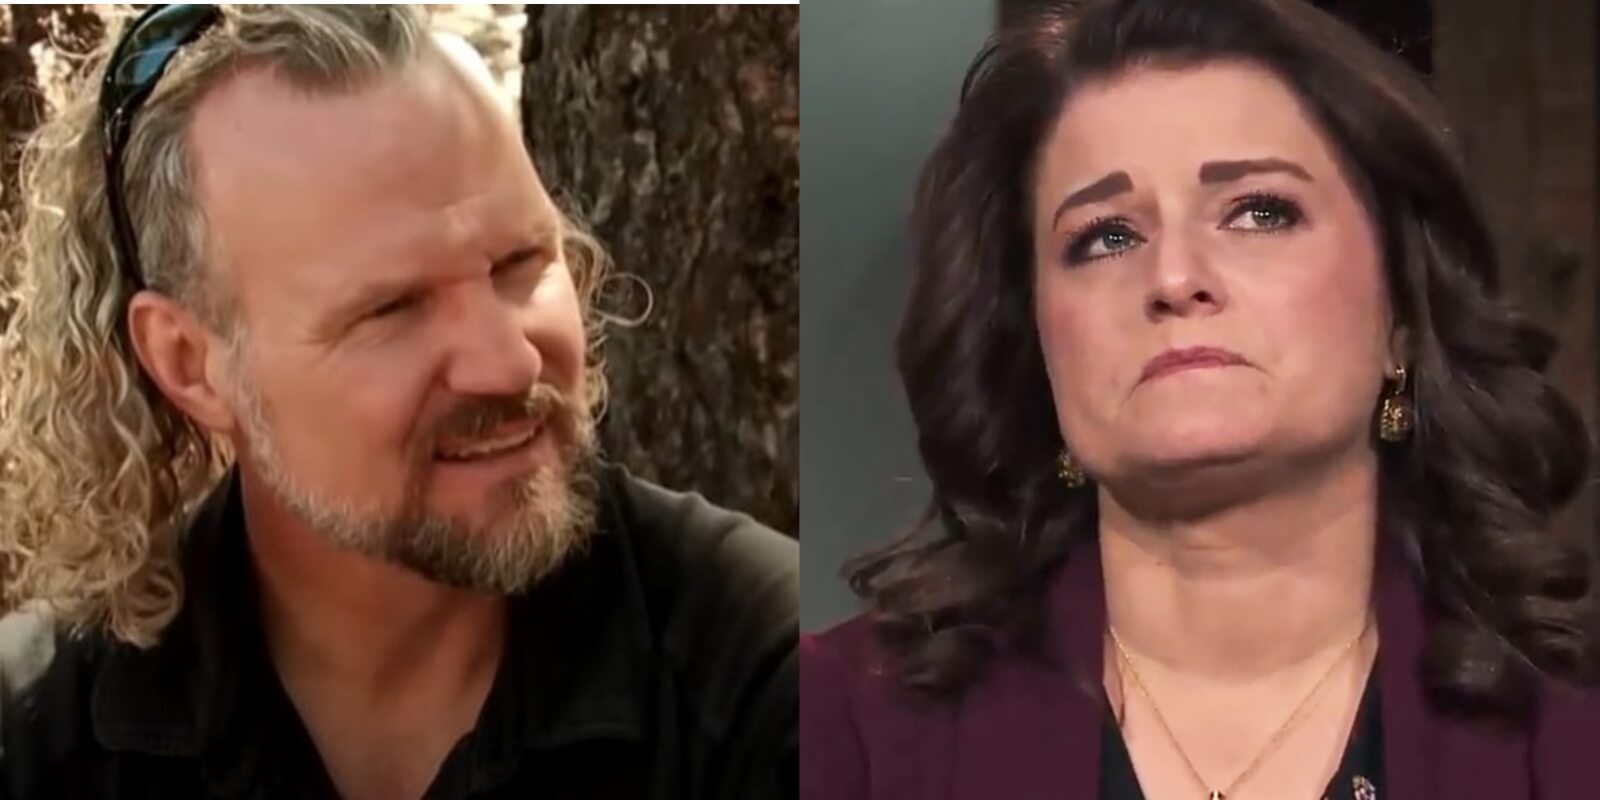 Kody Brown and Robyn Brown in side-by-side photographs from season 18 of TLC's 'Sister Wives.'